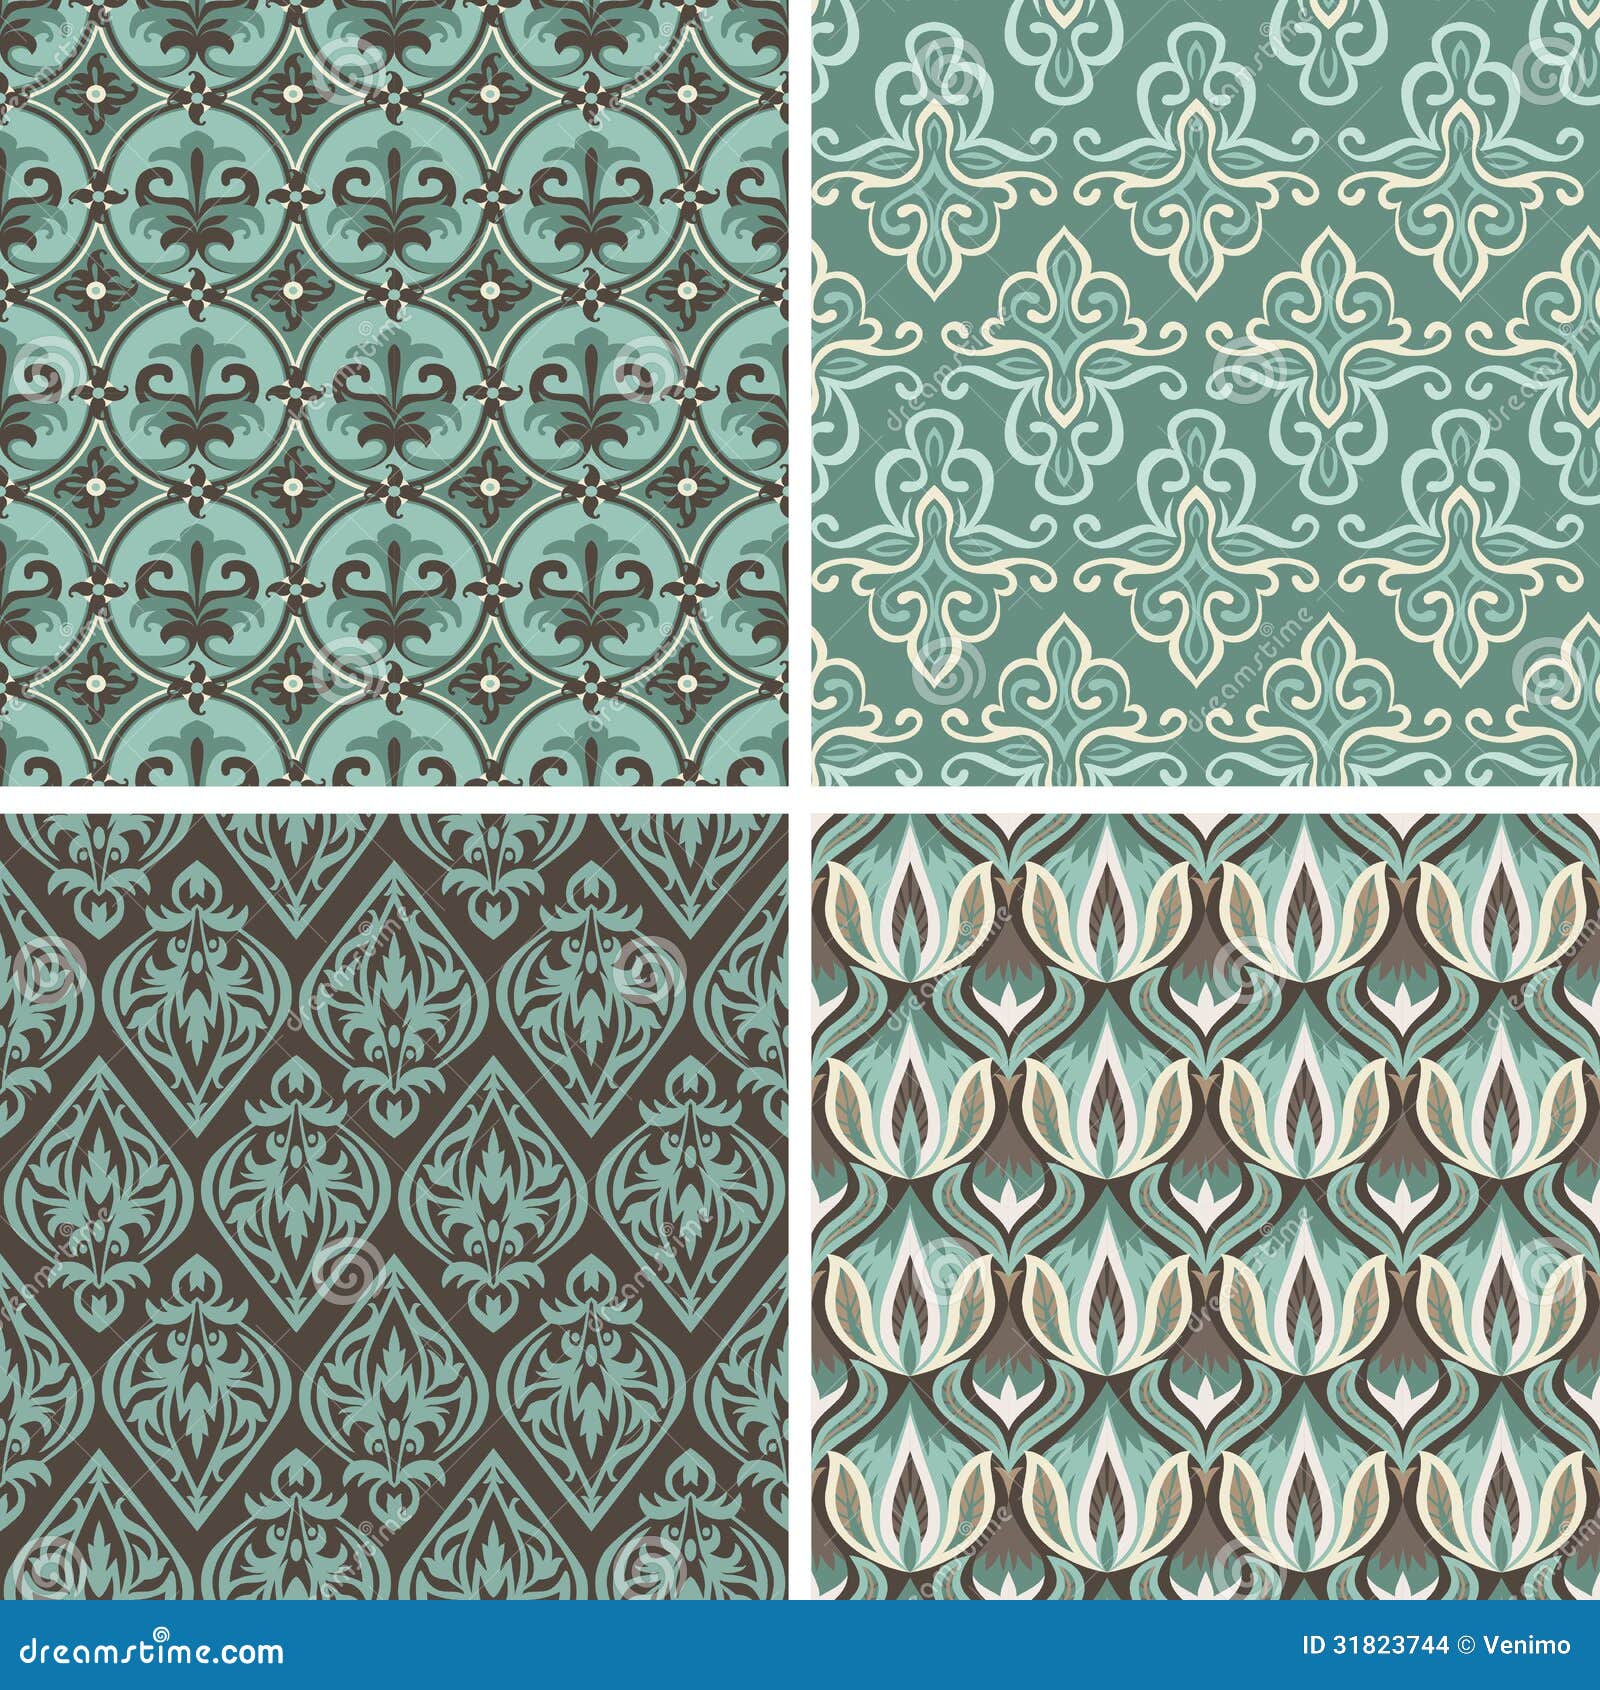 Vector Set With Vintage Seamless Patterns Stock Images - Image: 31823744